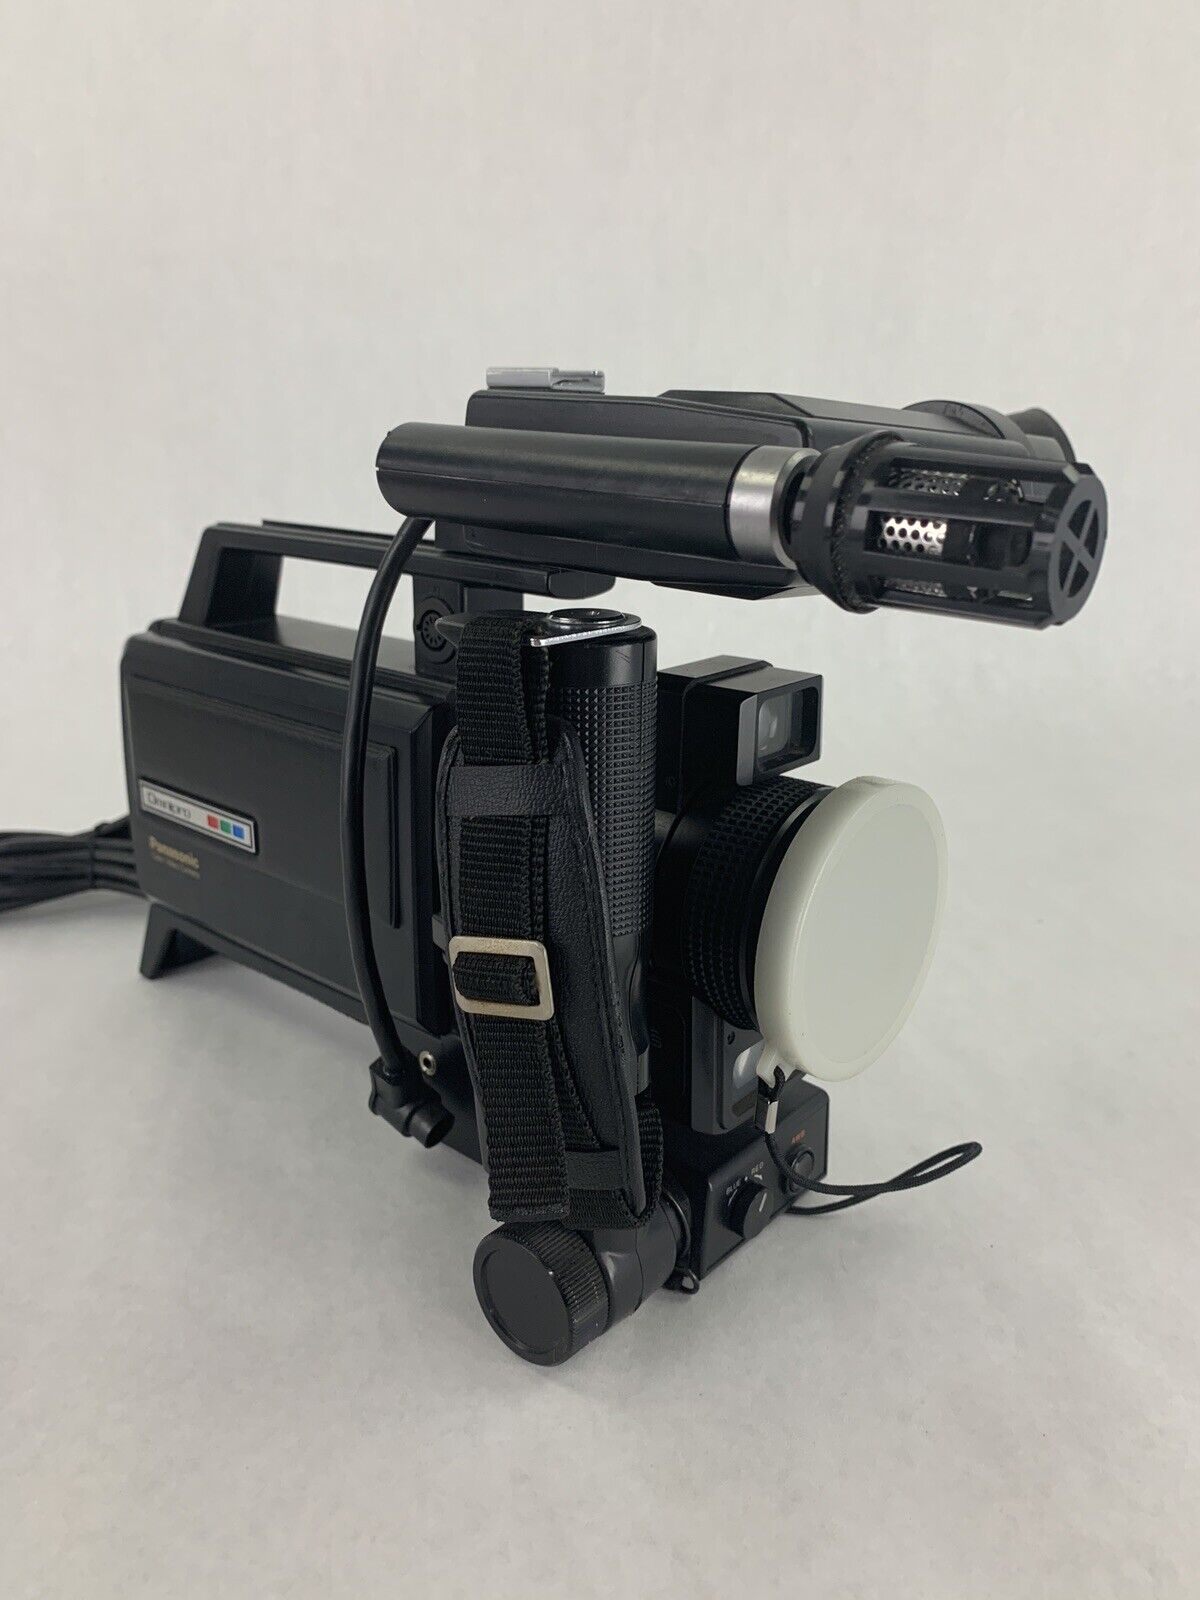 Panasonic Color Video Camera Omnipro x6 Power Zoom PK-956 Untested